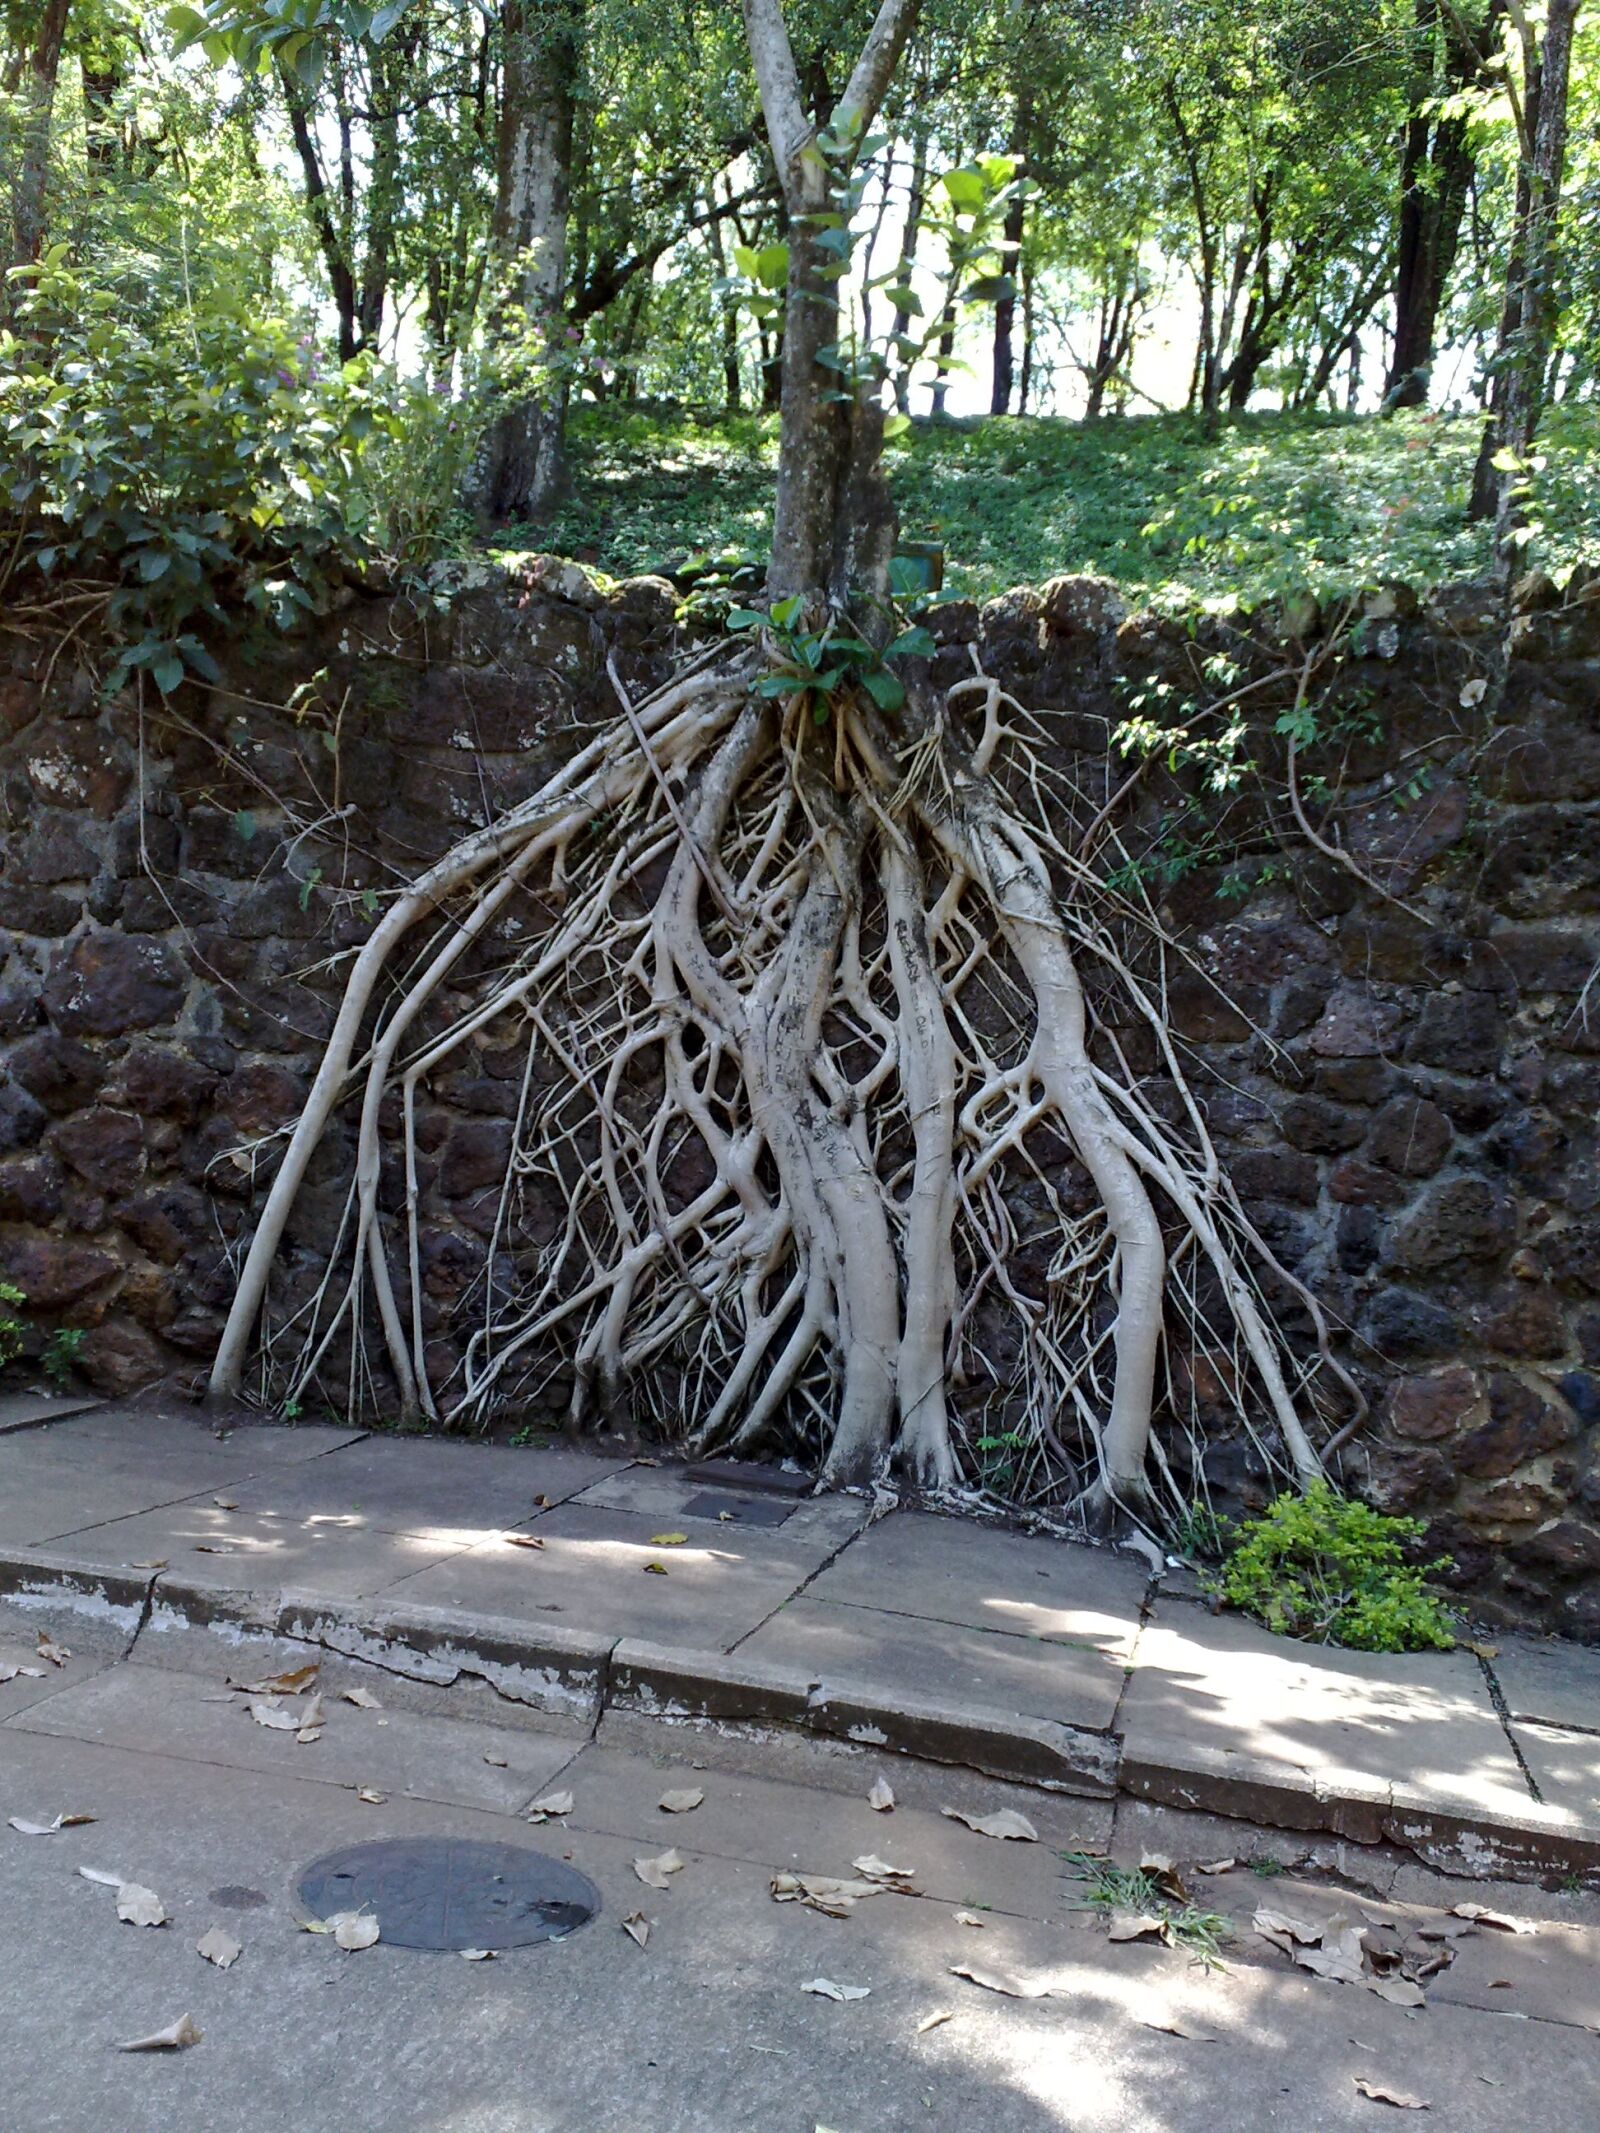 Nokia N82 sample photo. Tree roots, exposed, park photography